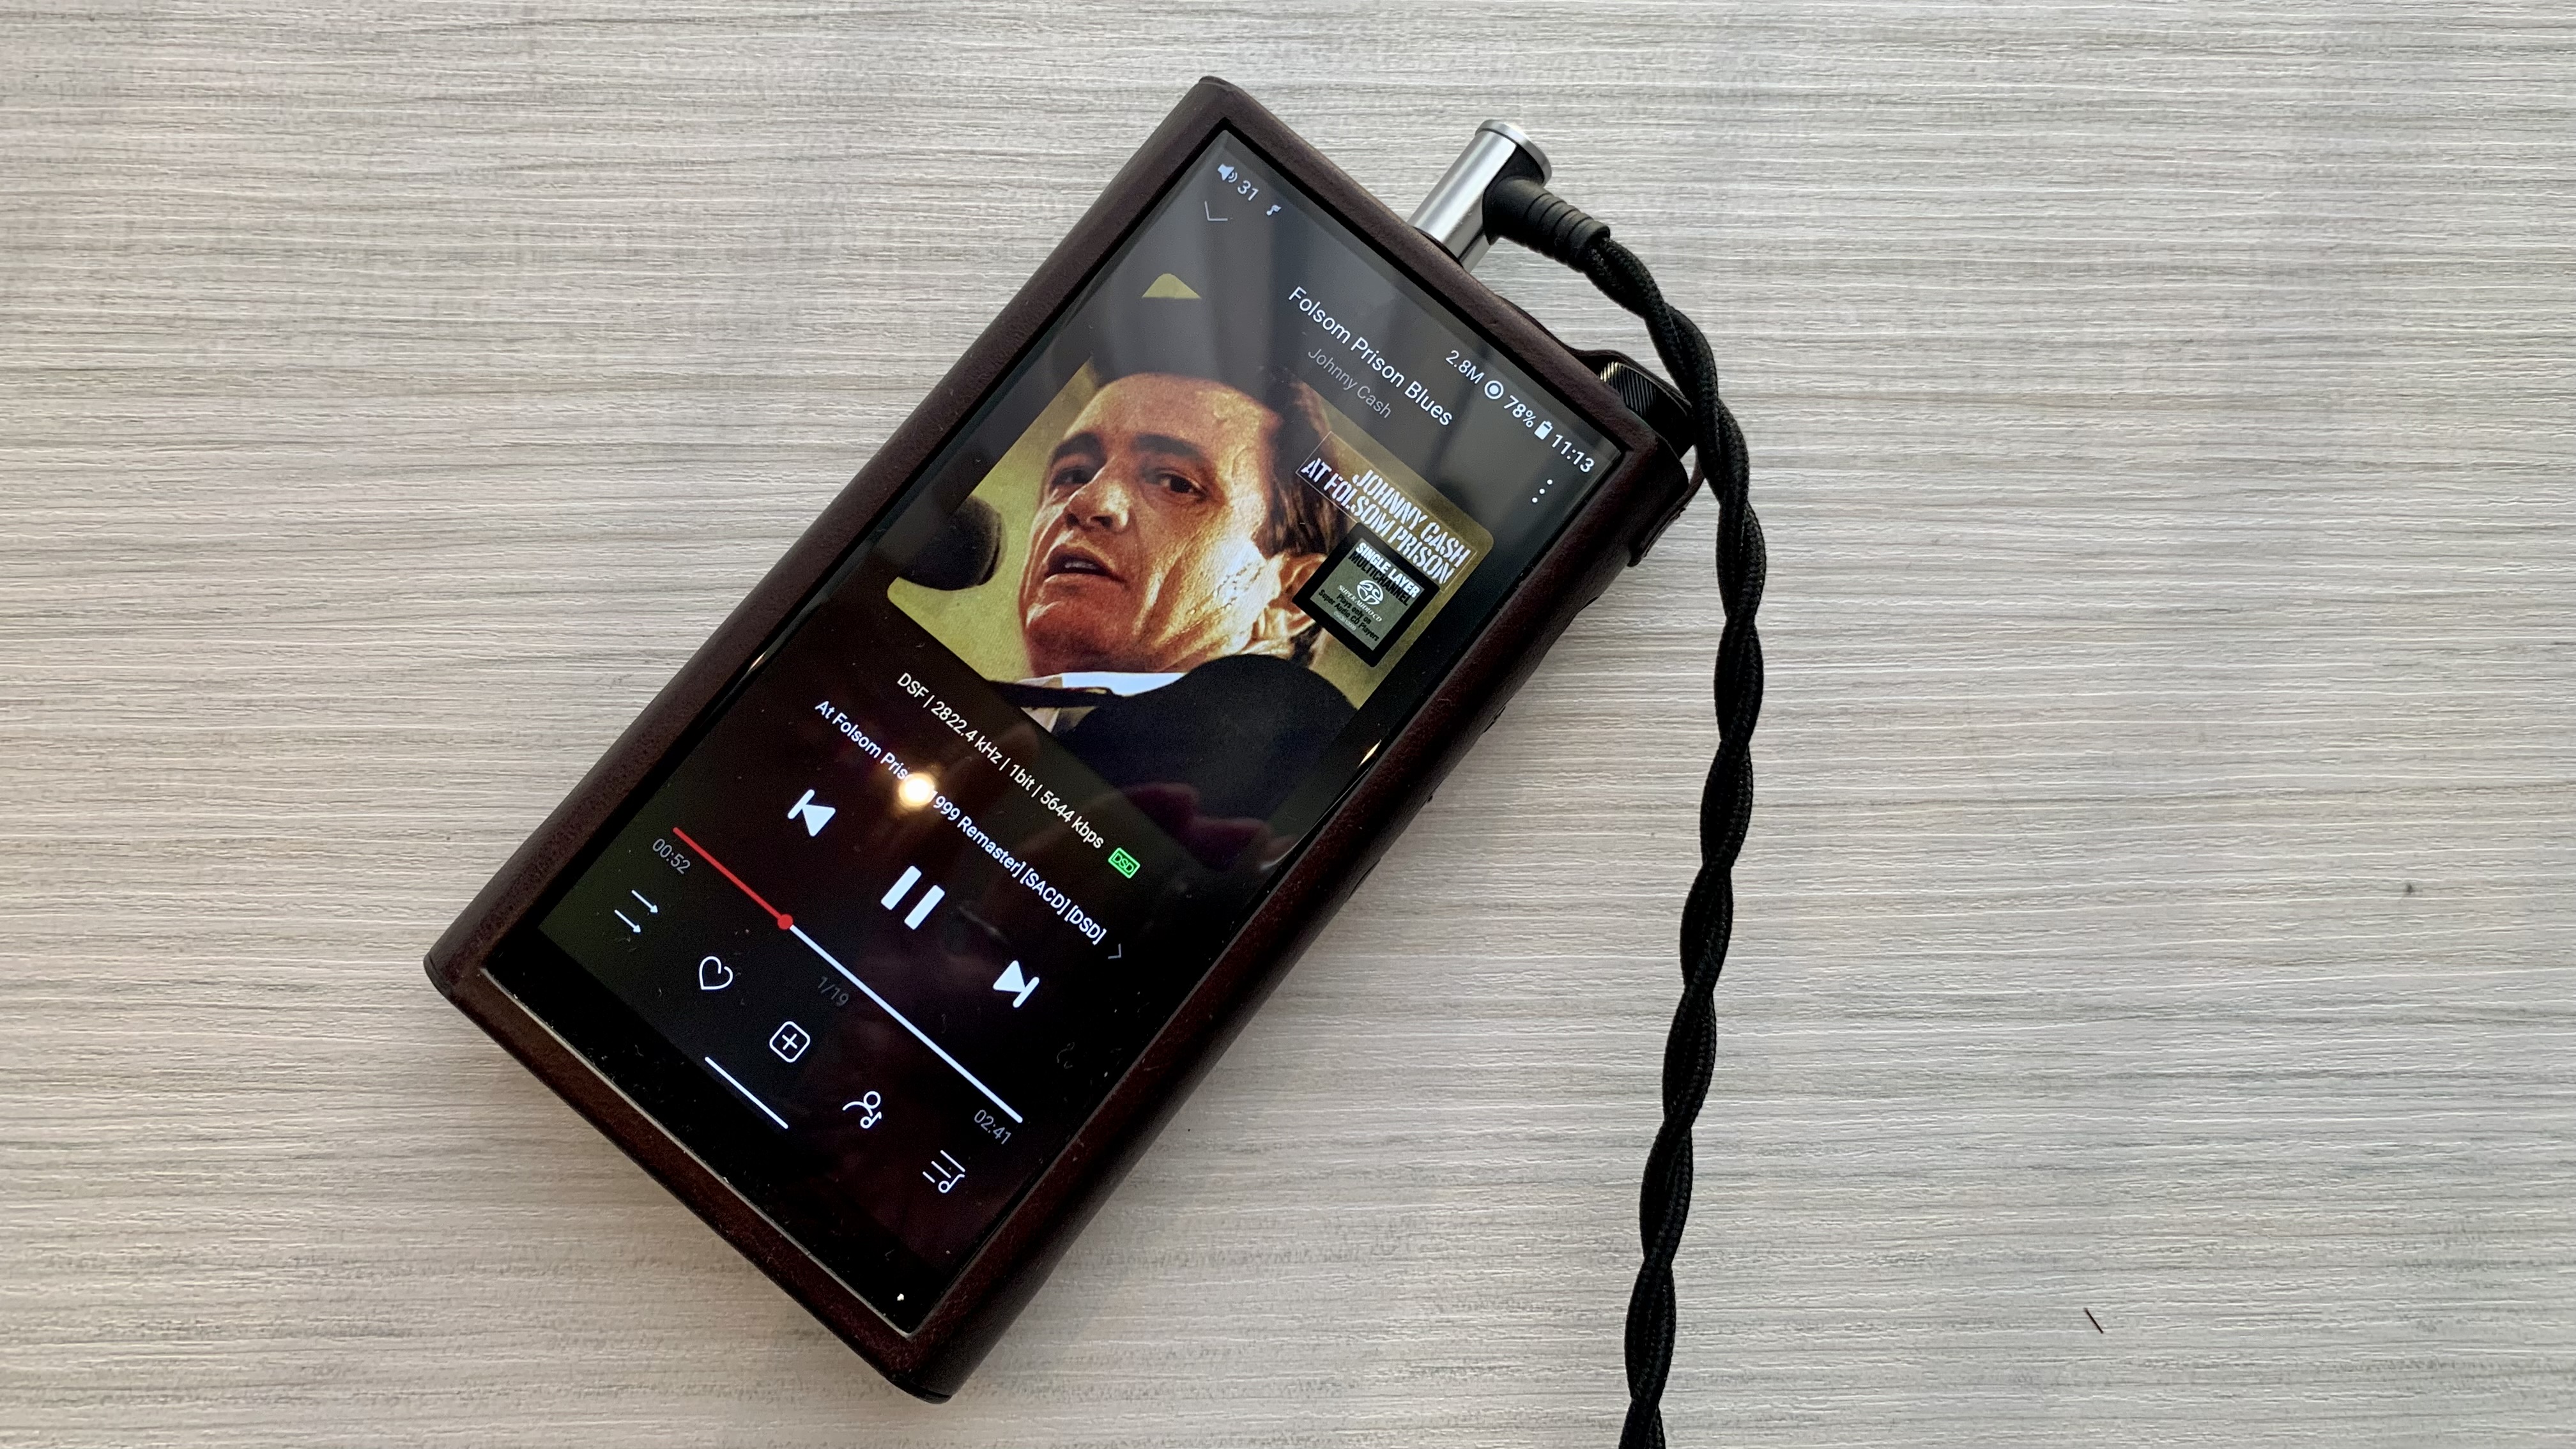 FiiO M15S with Johnny Cash on the screen, on a coffee table